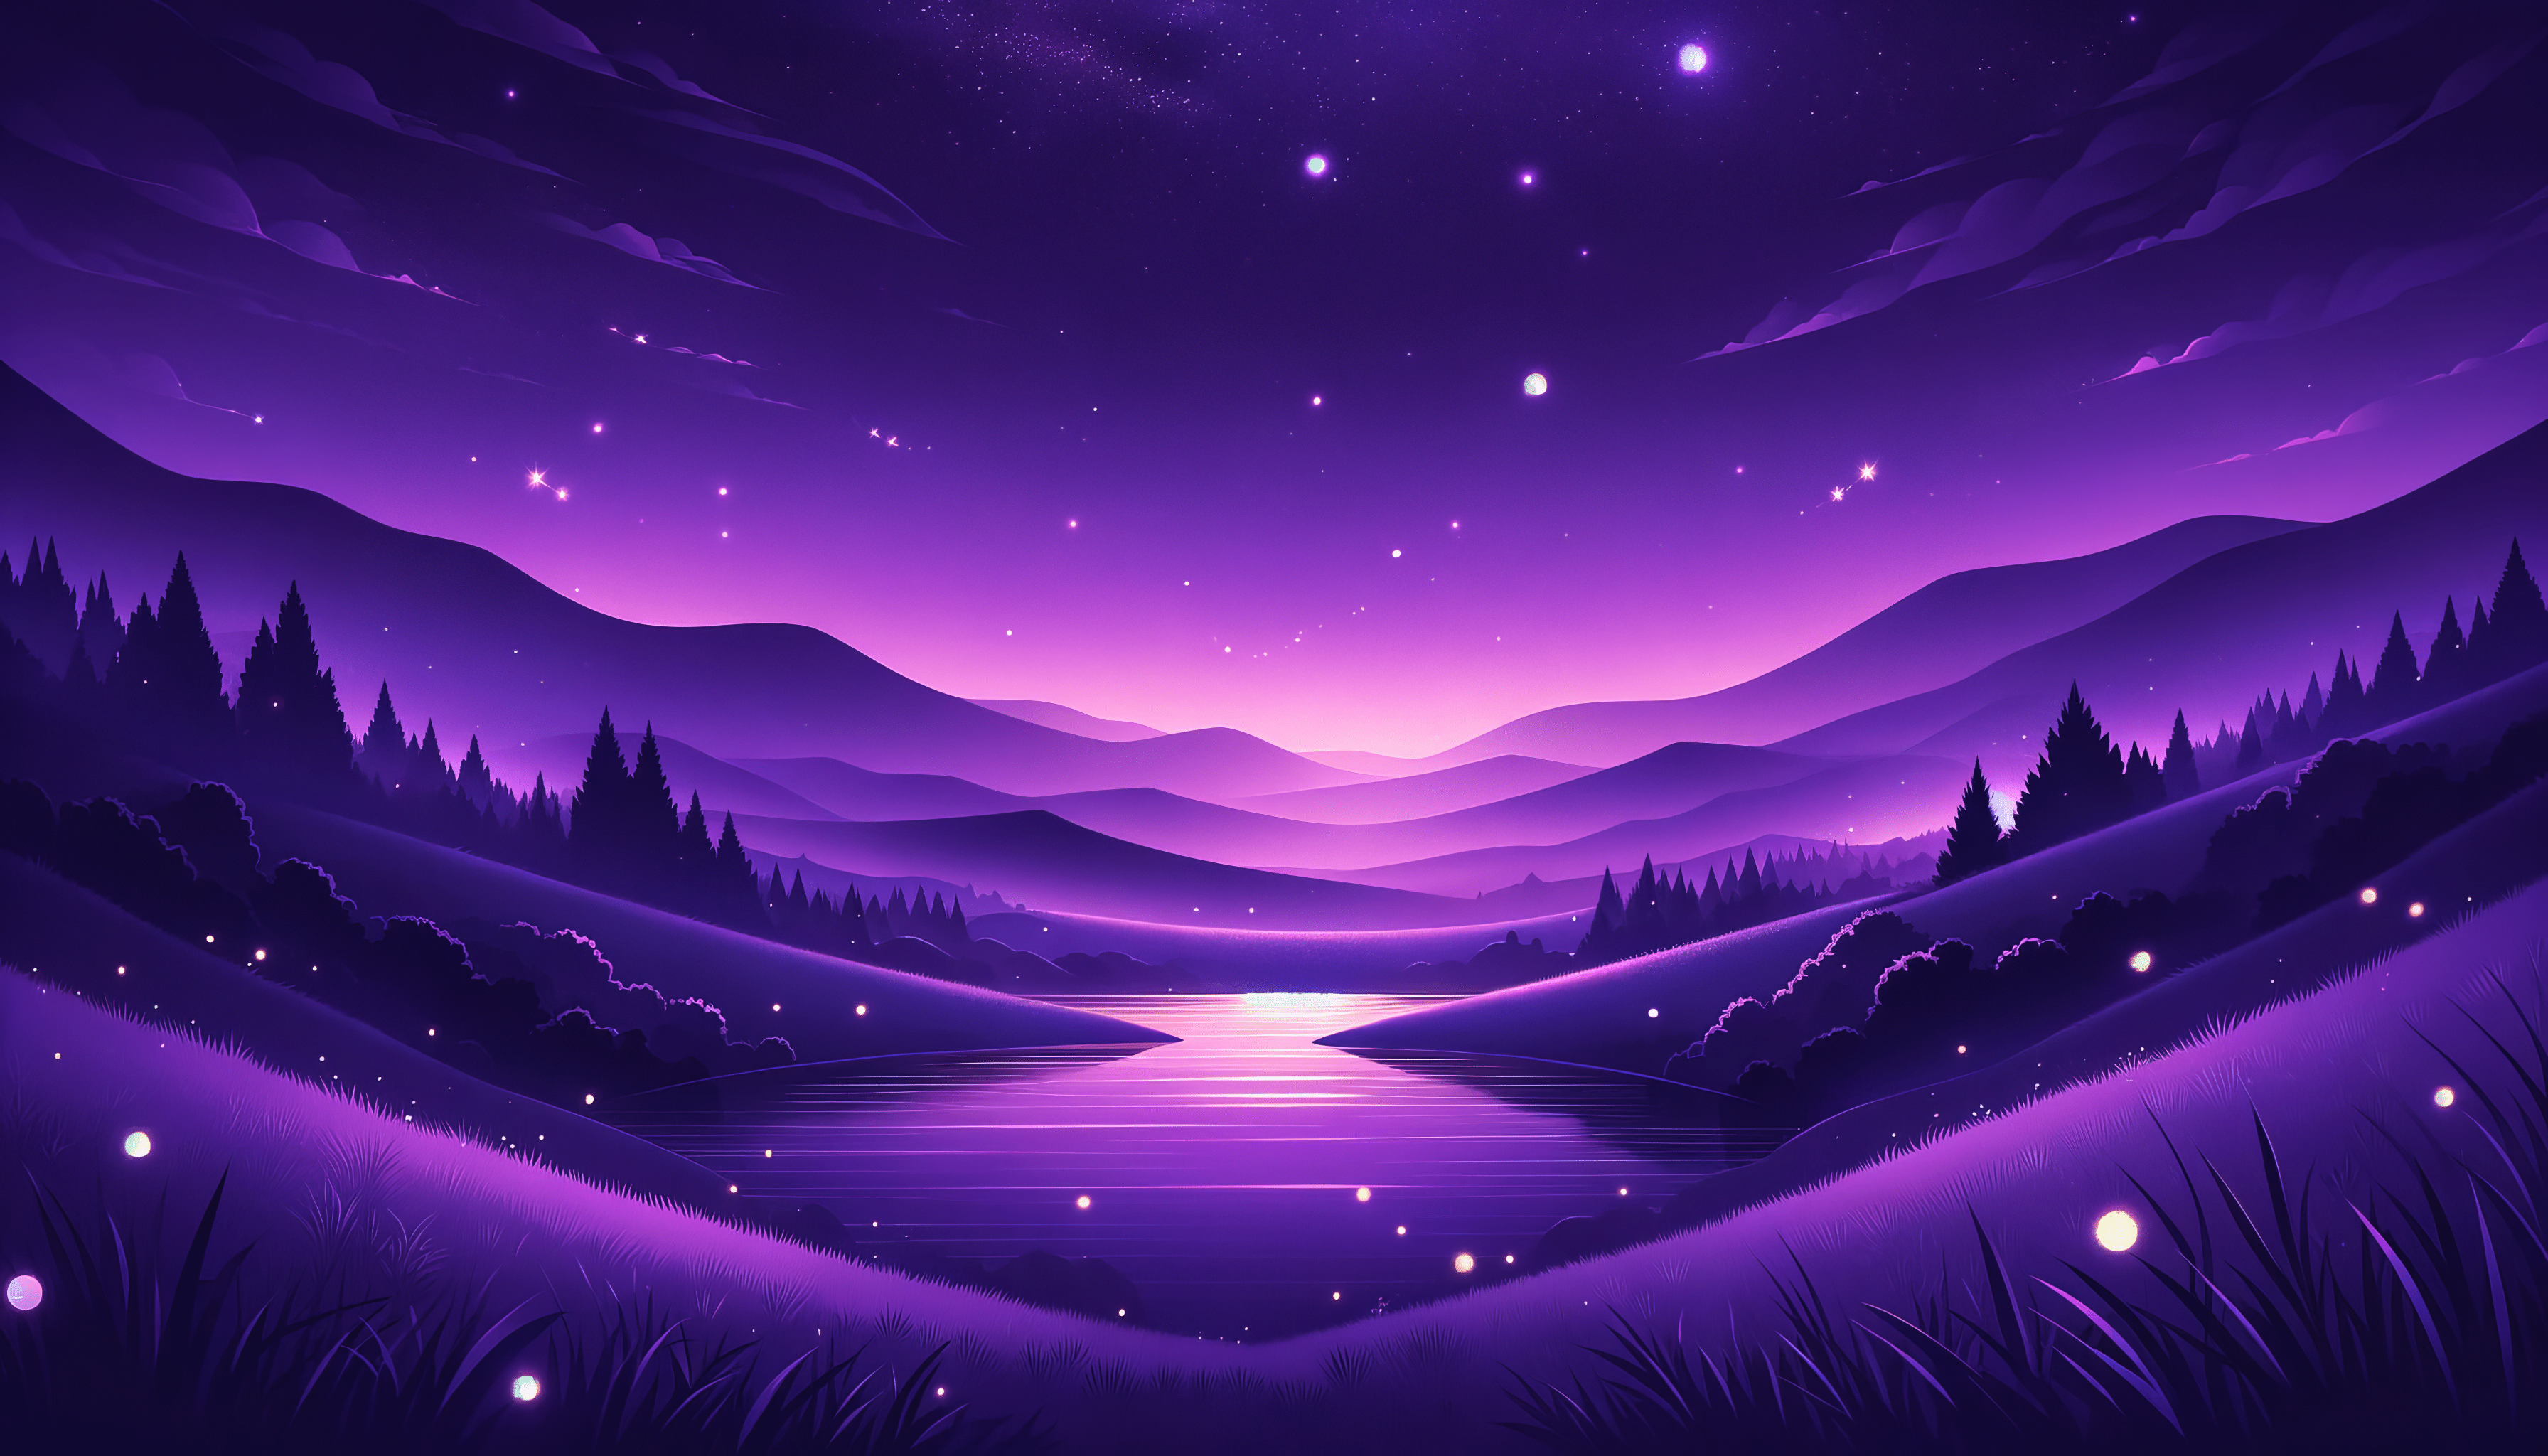 A purple night sky with stars, a river, and mountains - Purple, HD